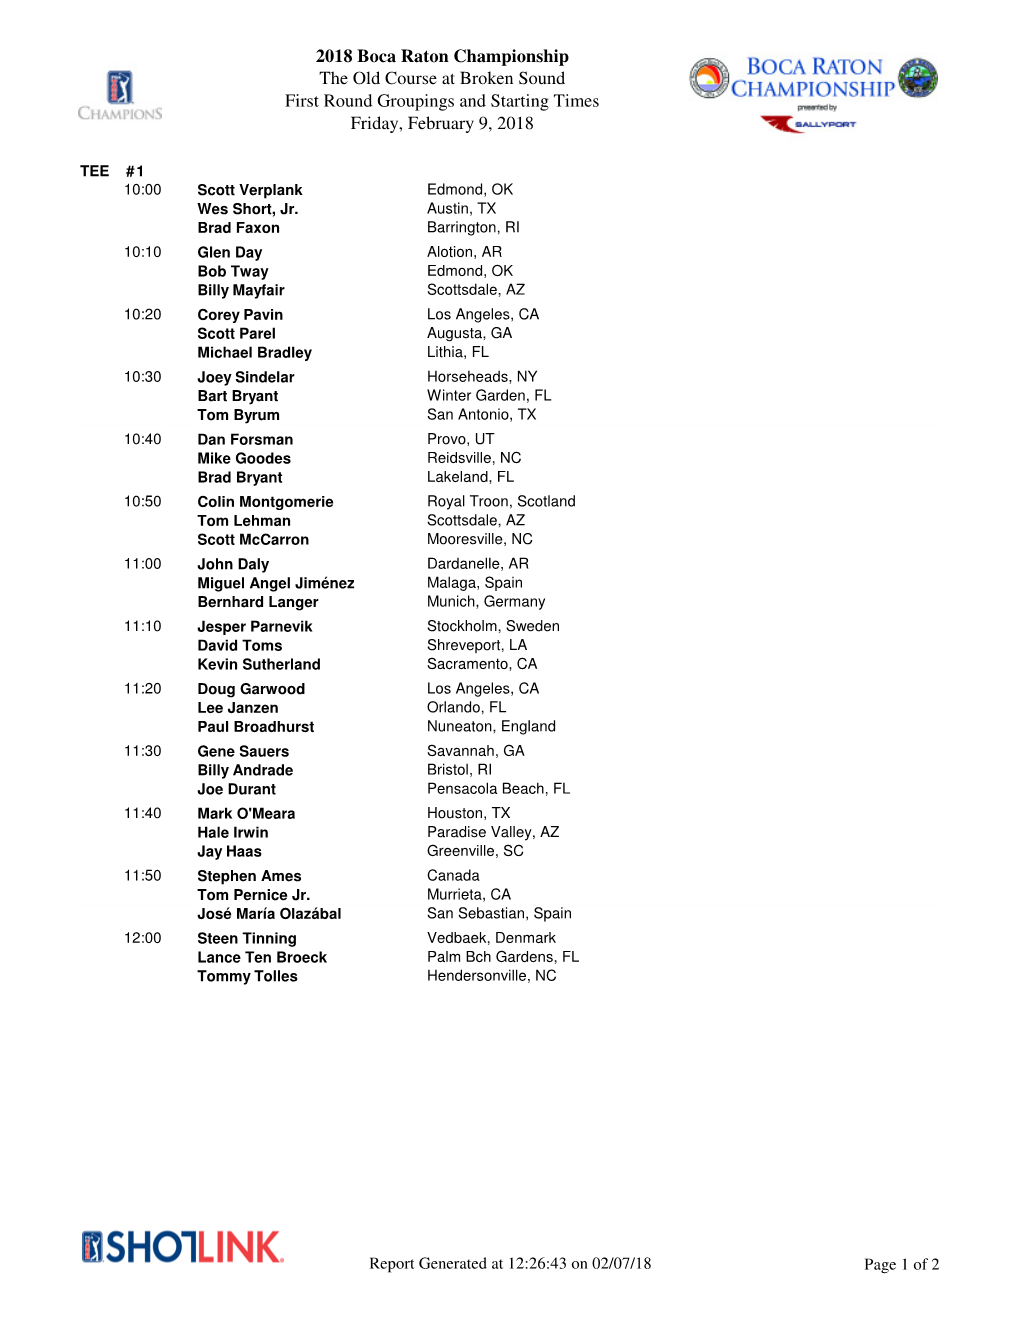 2018 Boca Raton Championship the Old Course at Broken Sound First Round Groupings and Starting Times Friday, February 9, 2018